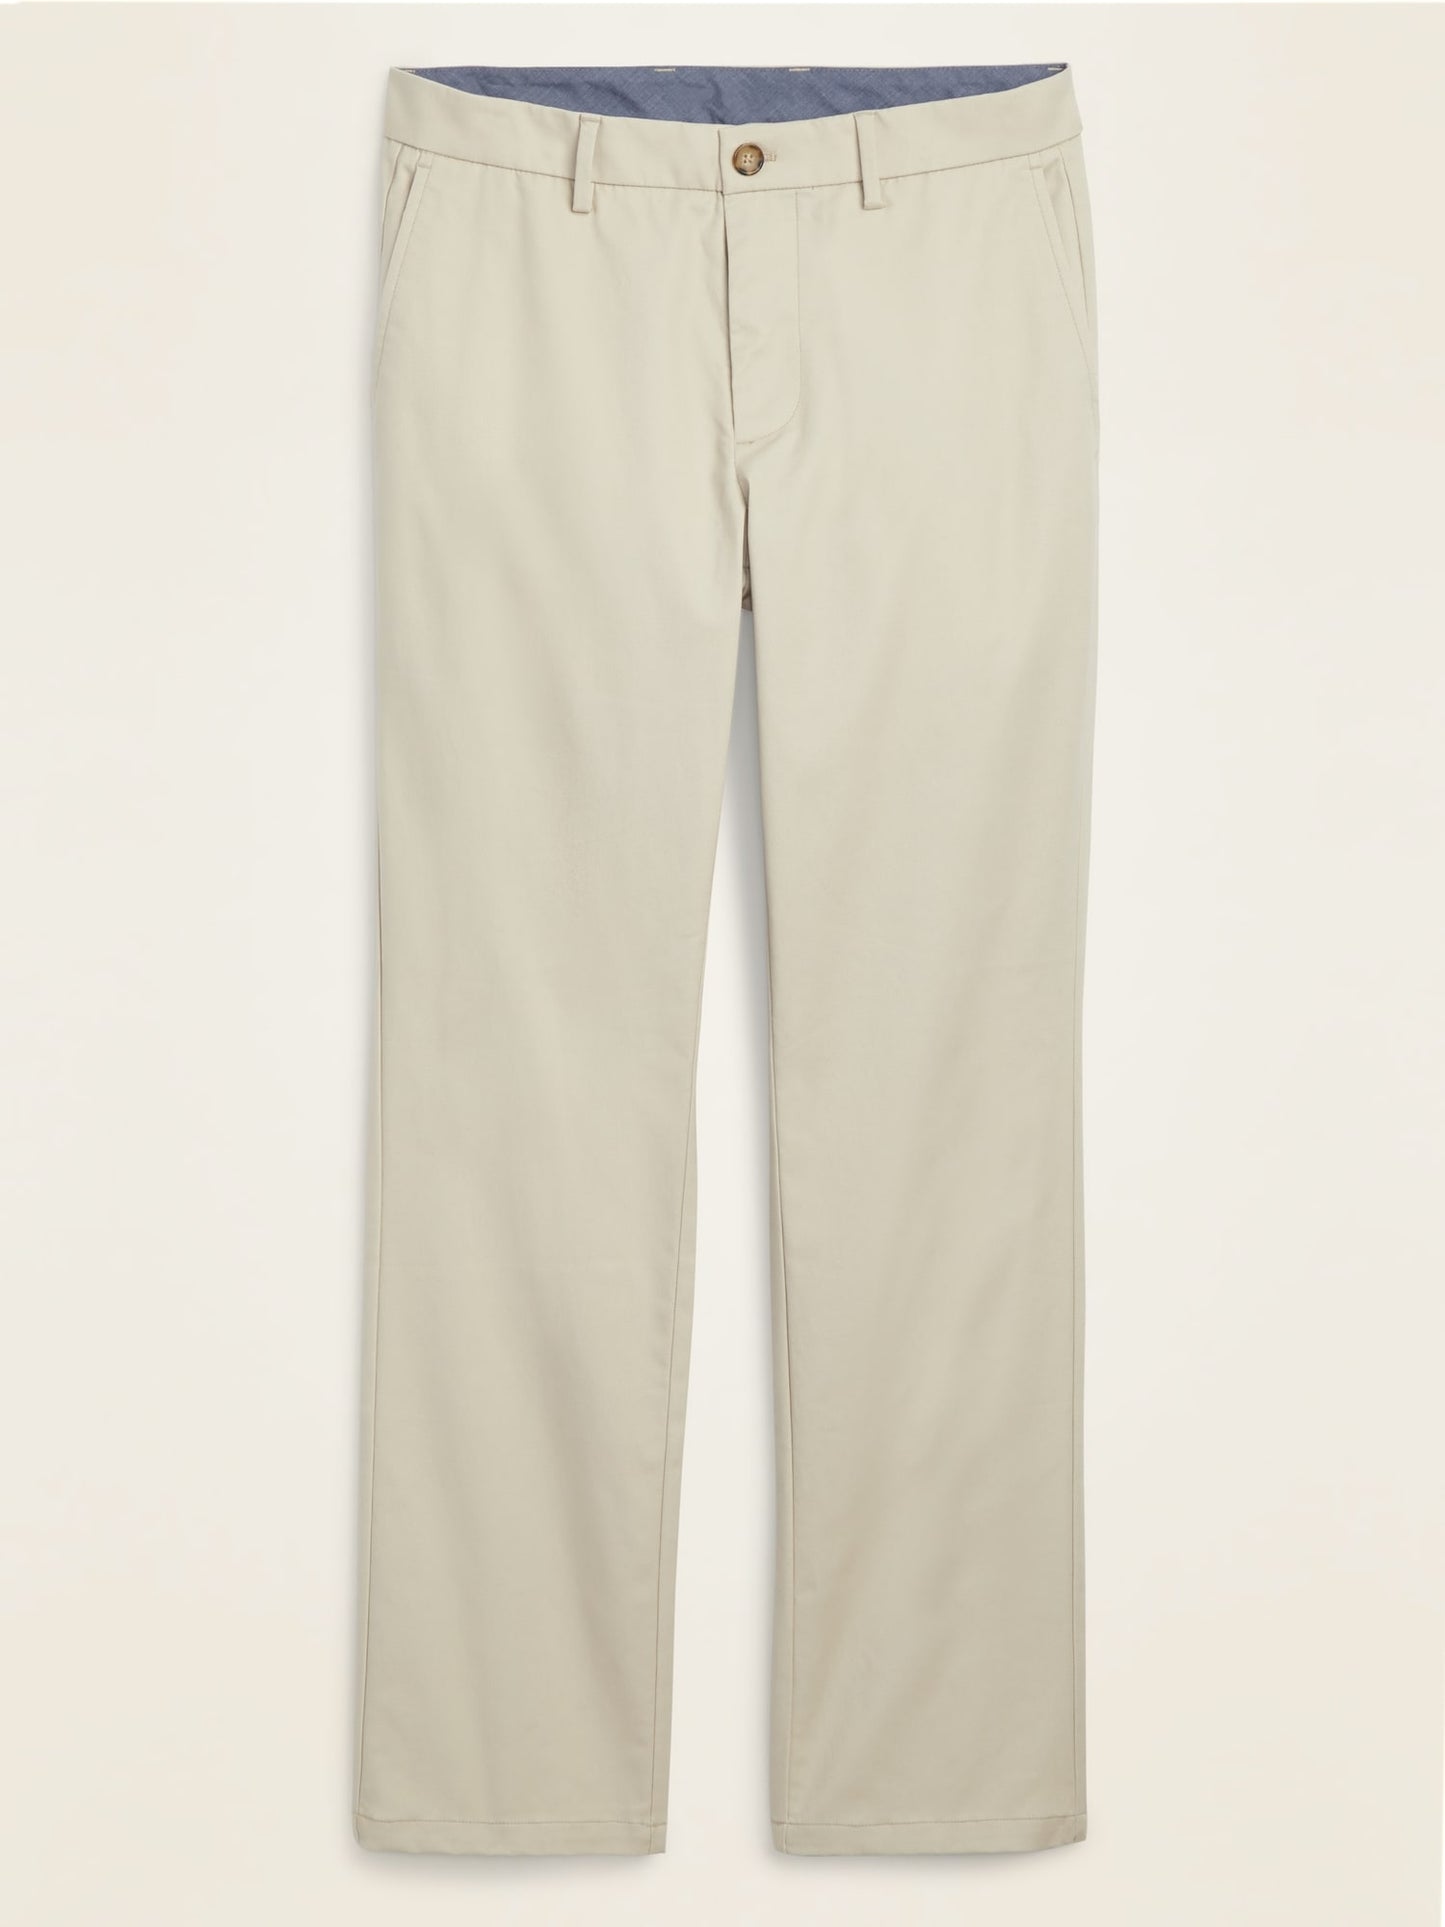 ON All-New Straight Ultimate Built-In Flex Chinos For Men - A Stones Throw